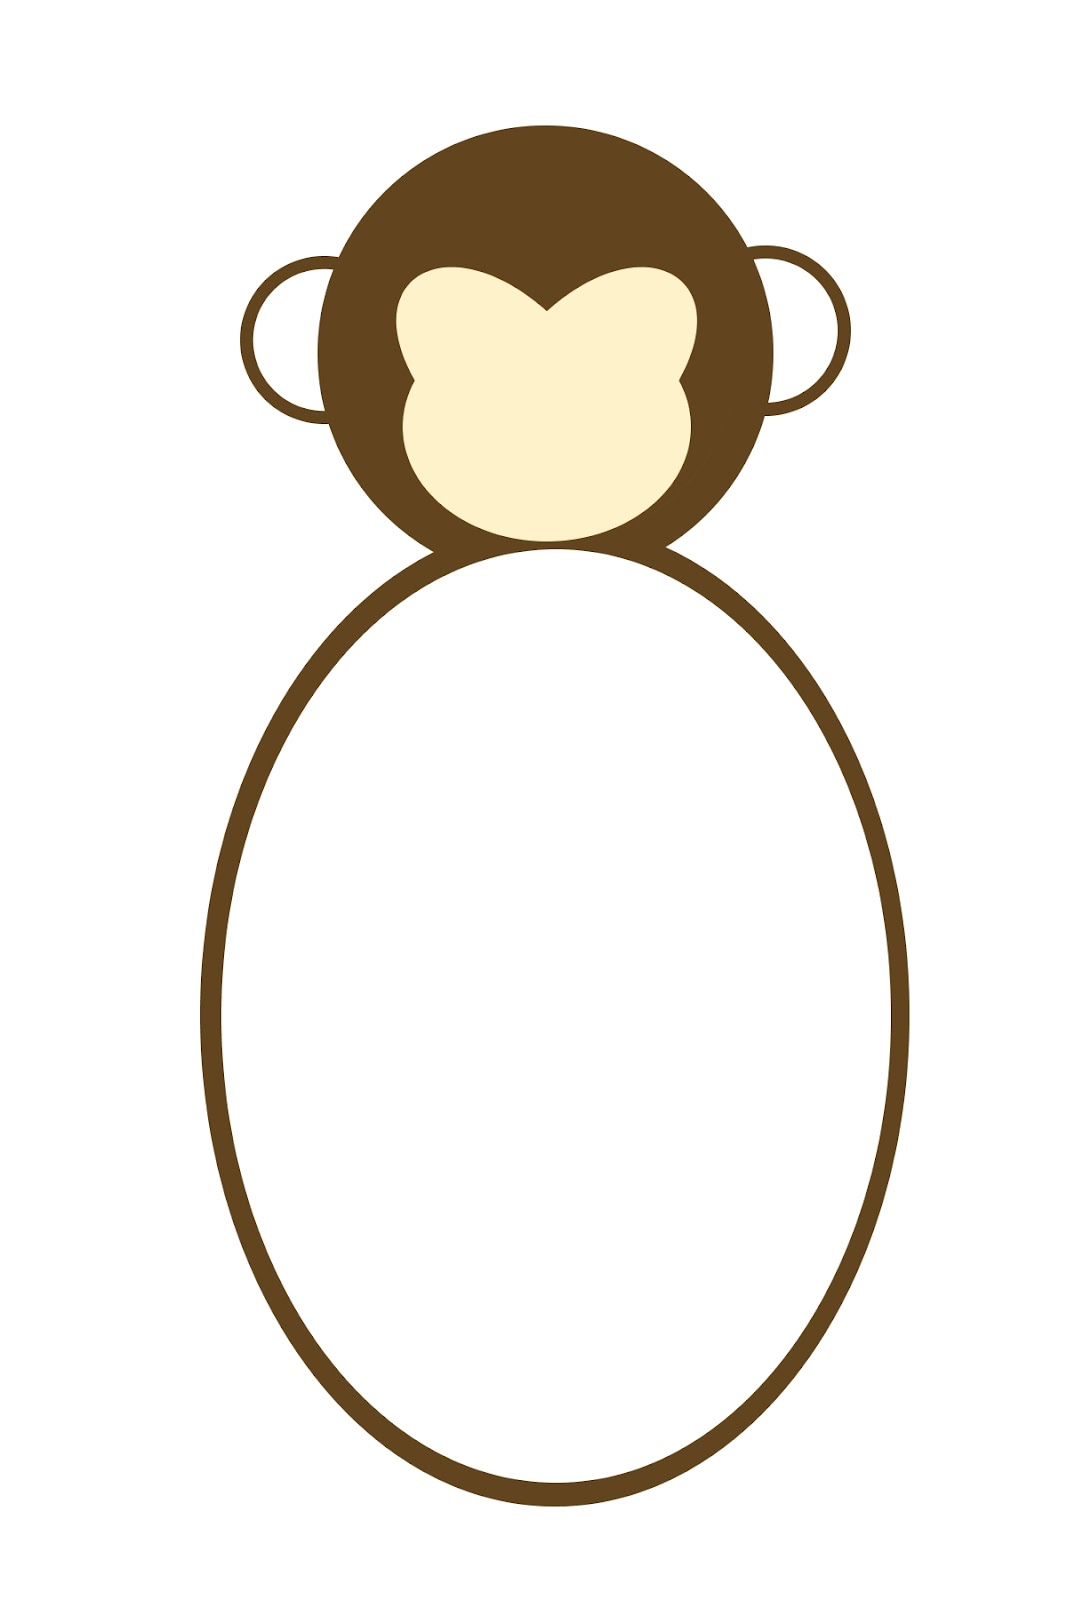 Hanging Monkey Template Free download on ClipArtMag